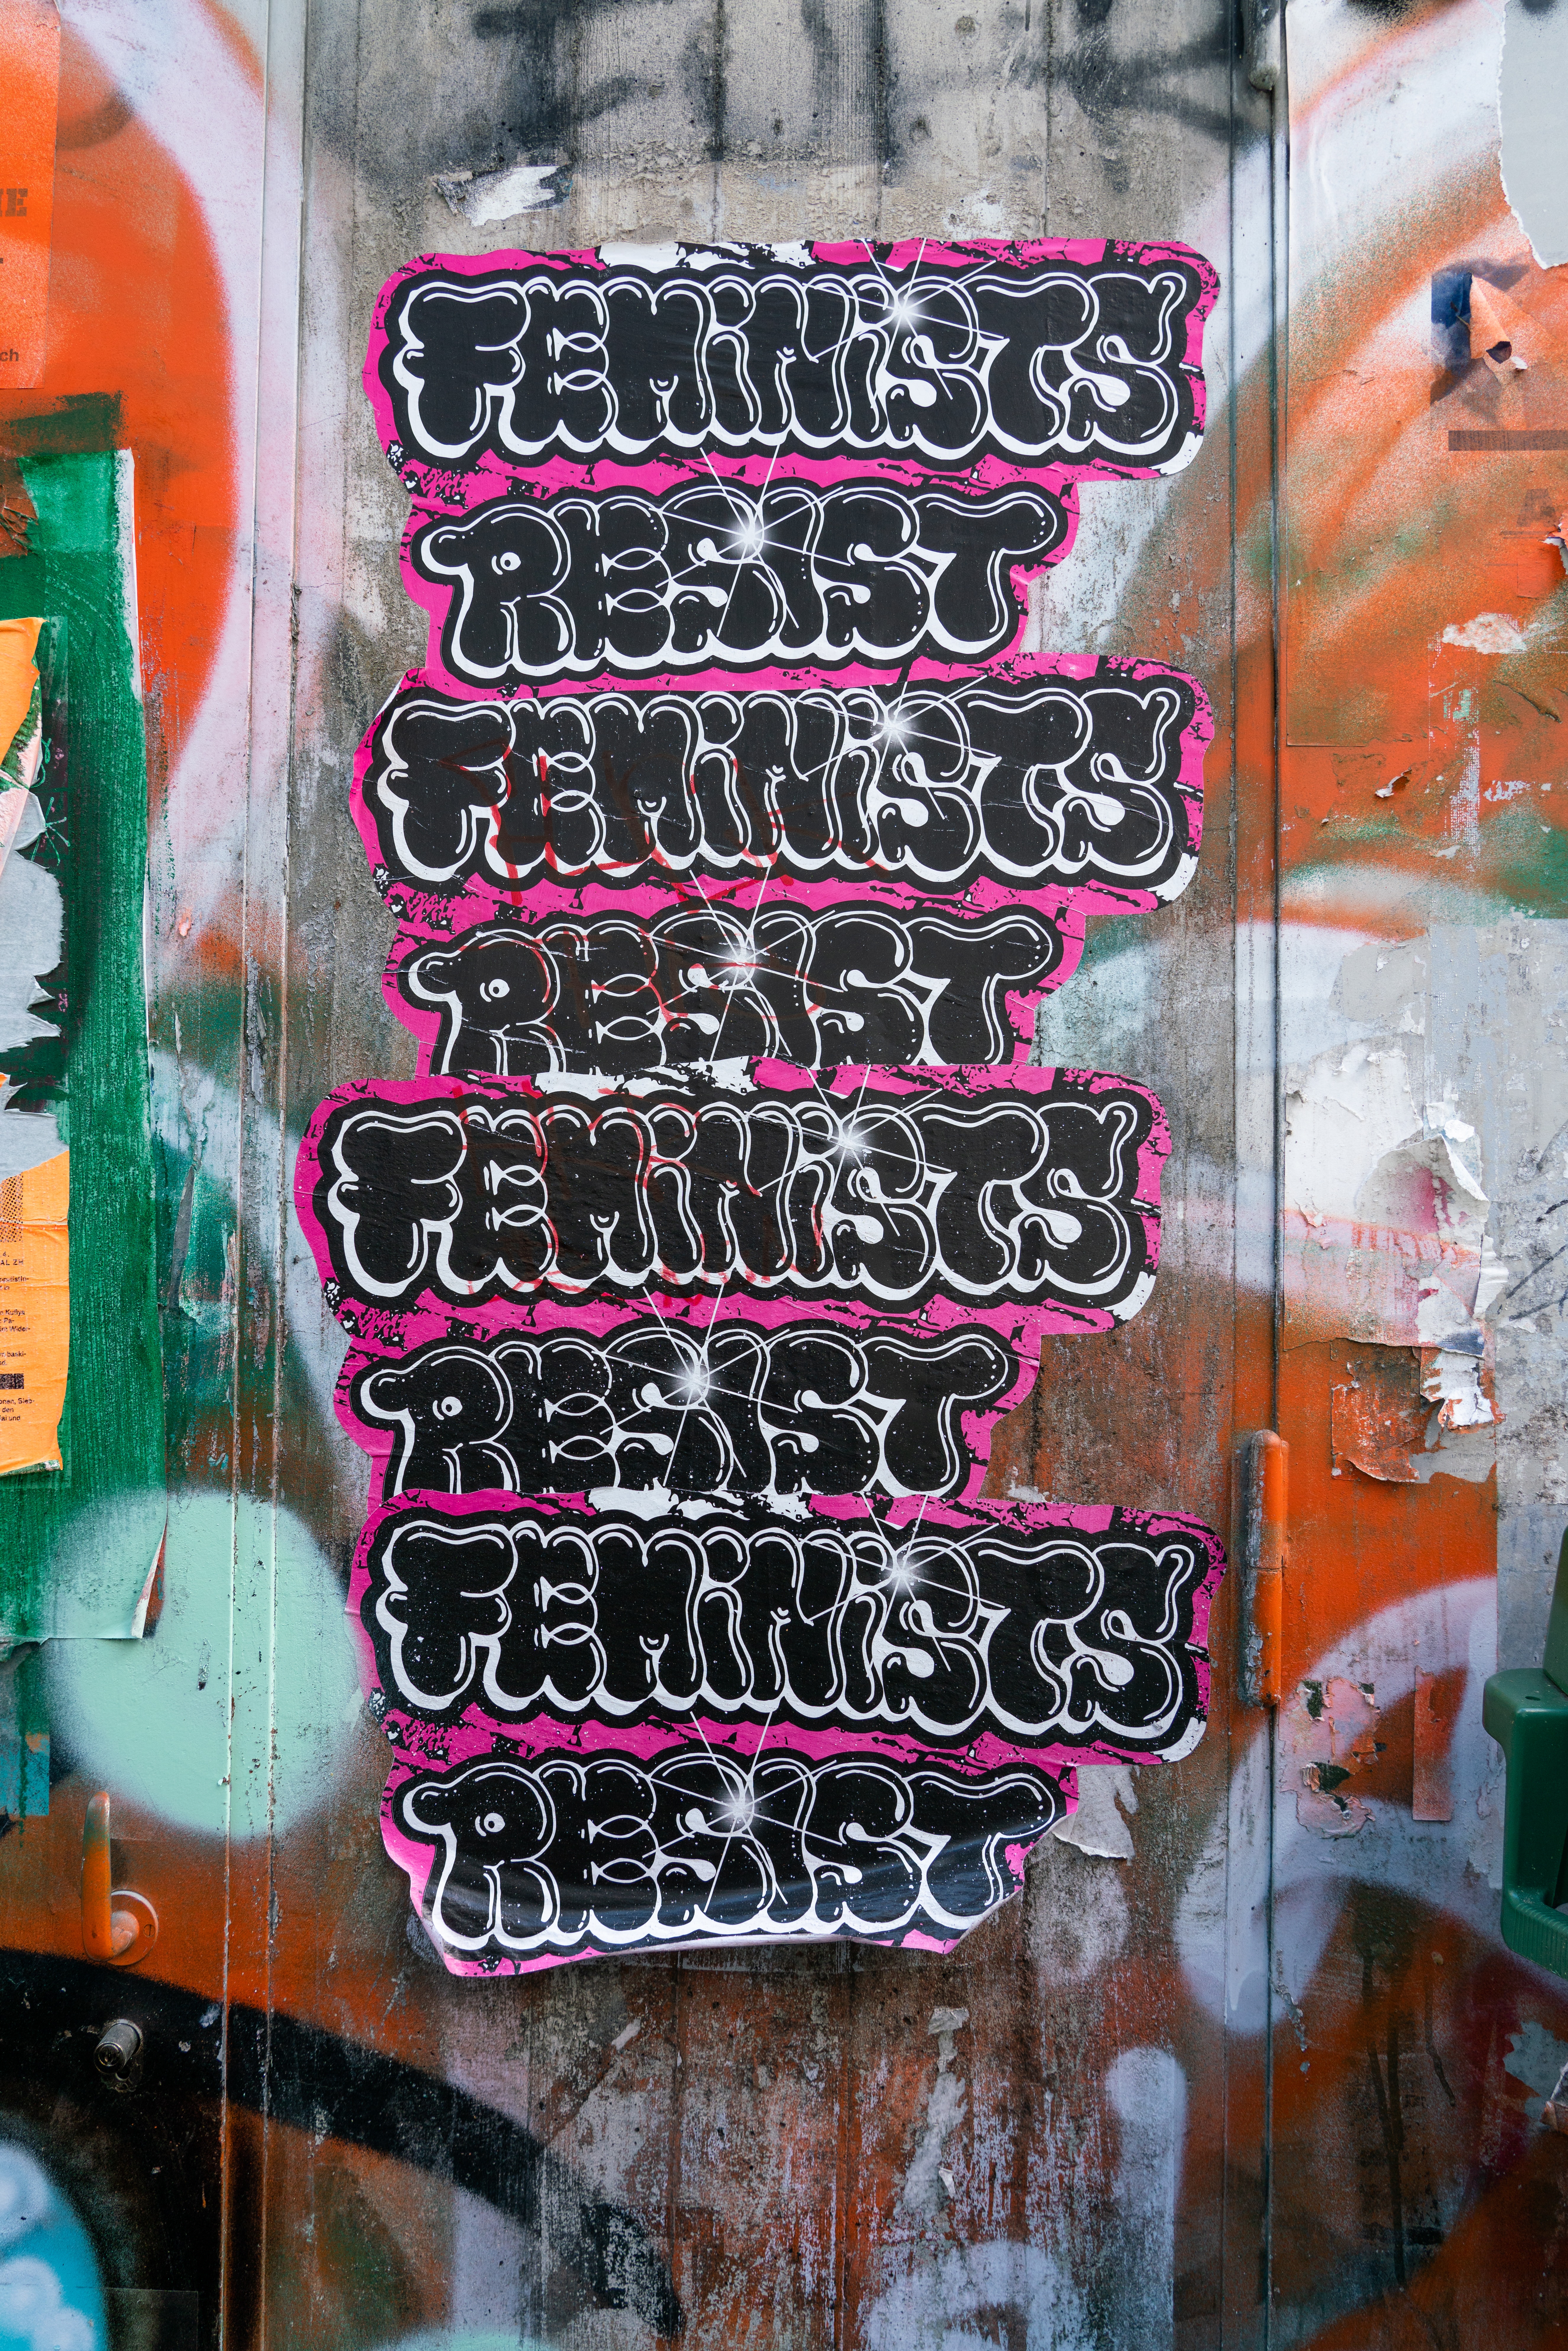 grafitti saying "feminist resist" repeatedly in black and pink color in a wall that is colorful 